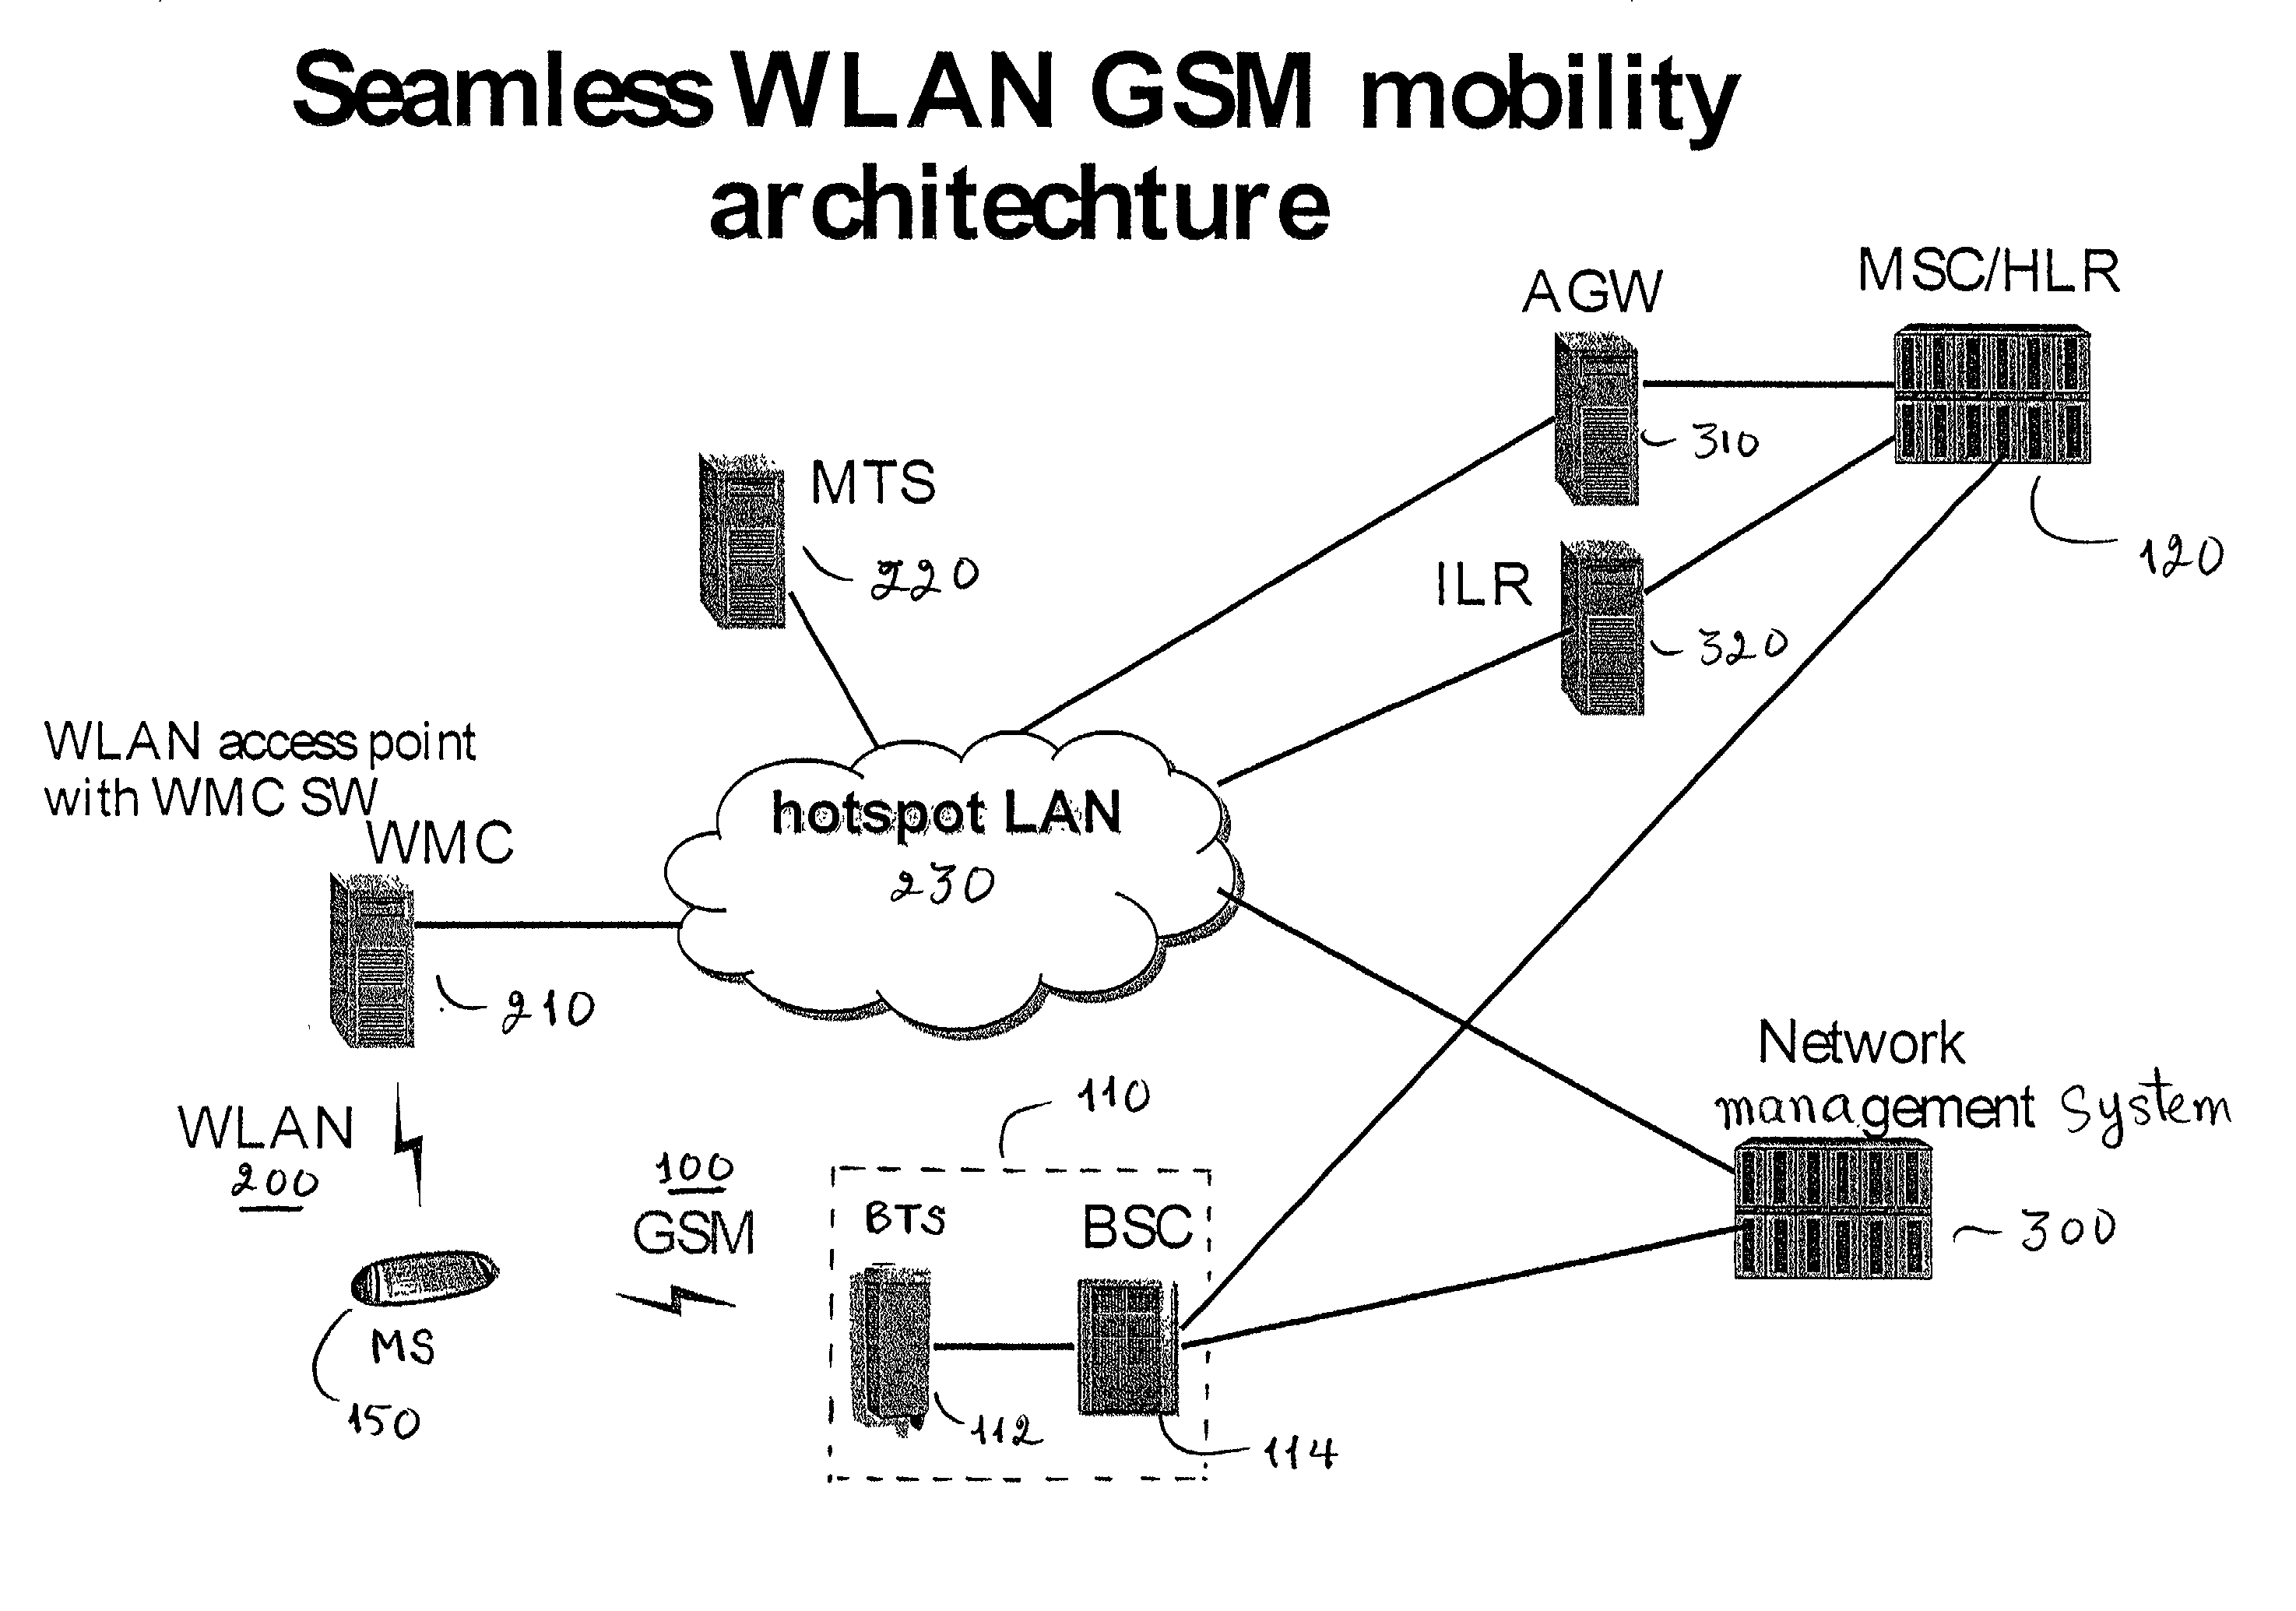 GSM Networks and solutions for providing seamless mobility between GSM Networks and different radio networks